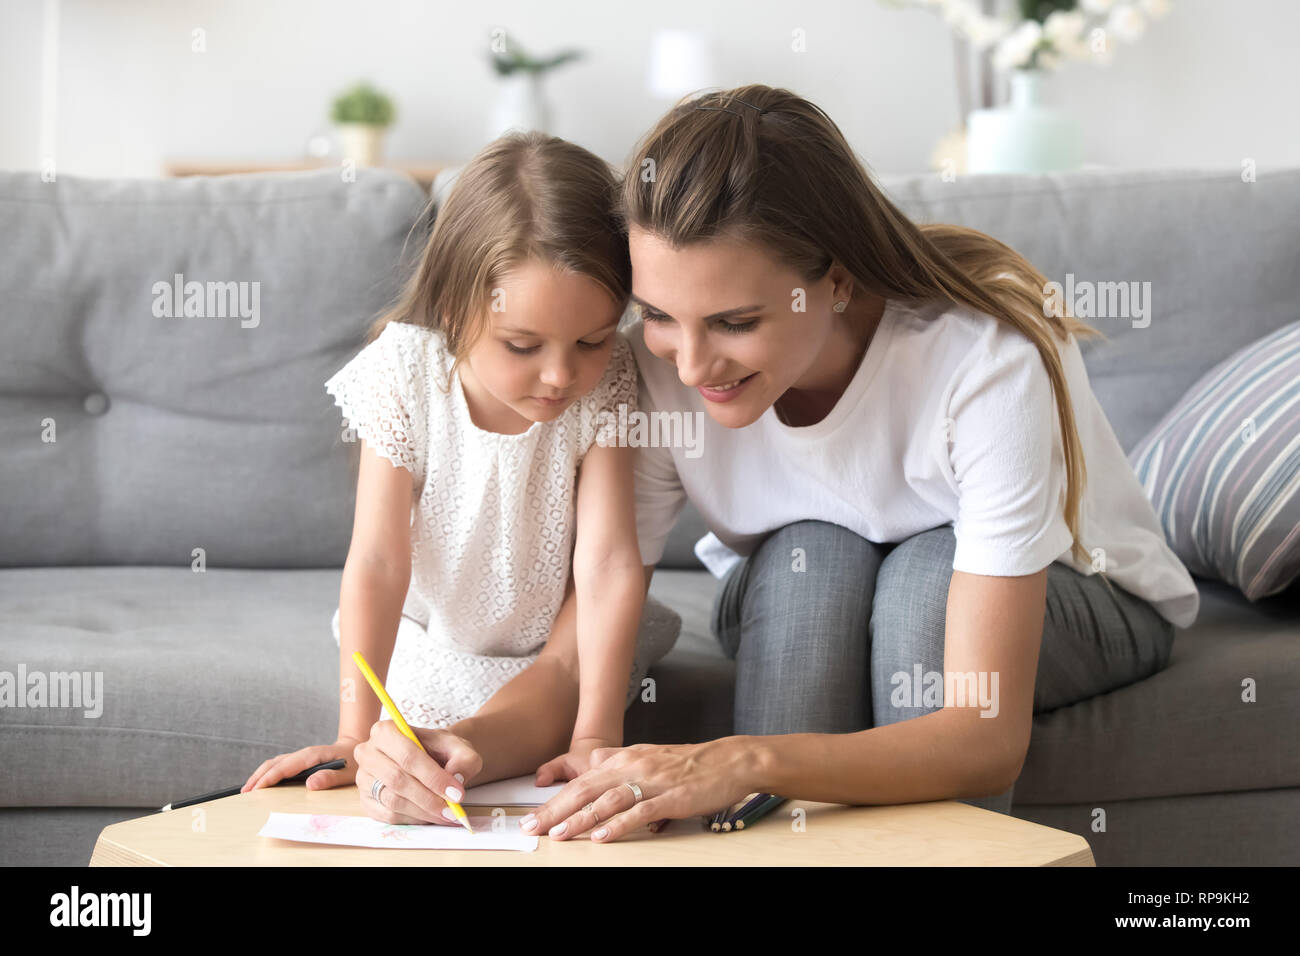 Smiling mother with preschool daughter drawing with colored pencils Stock Photo